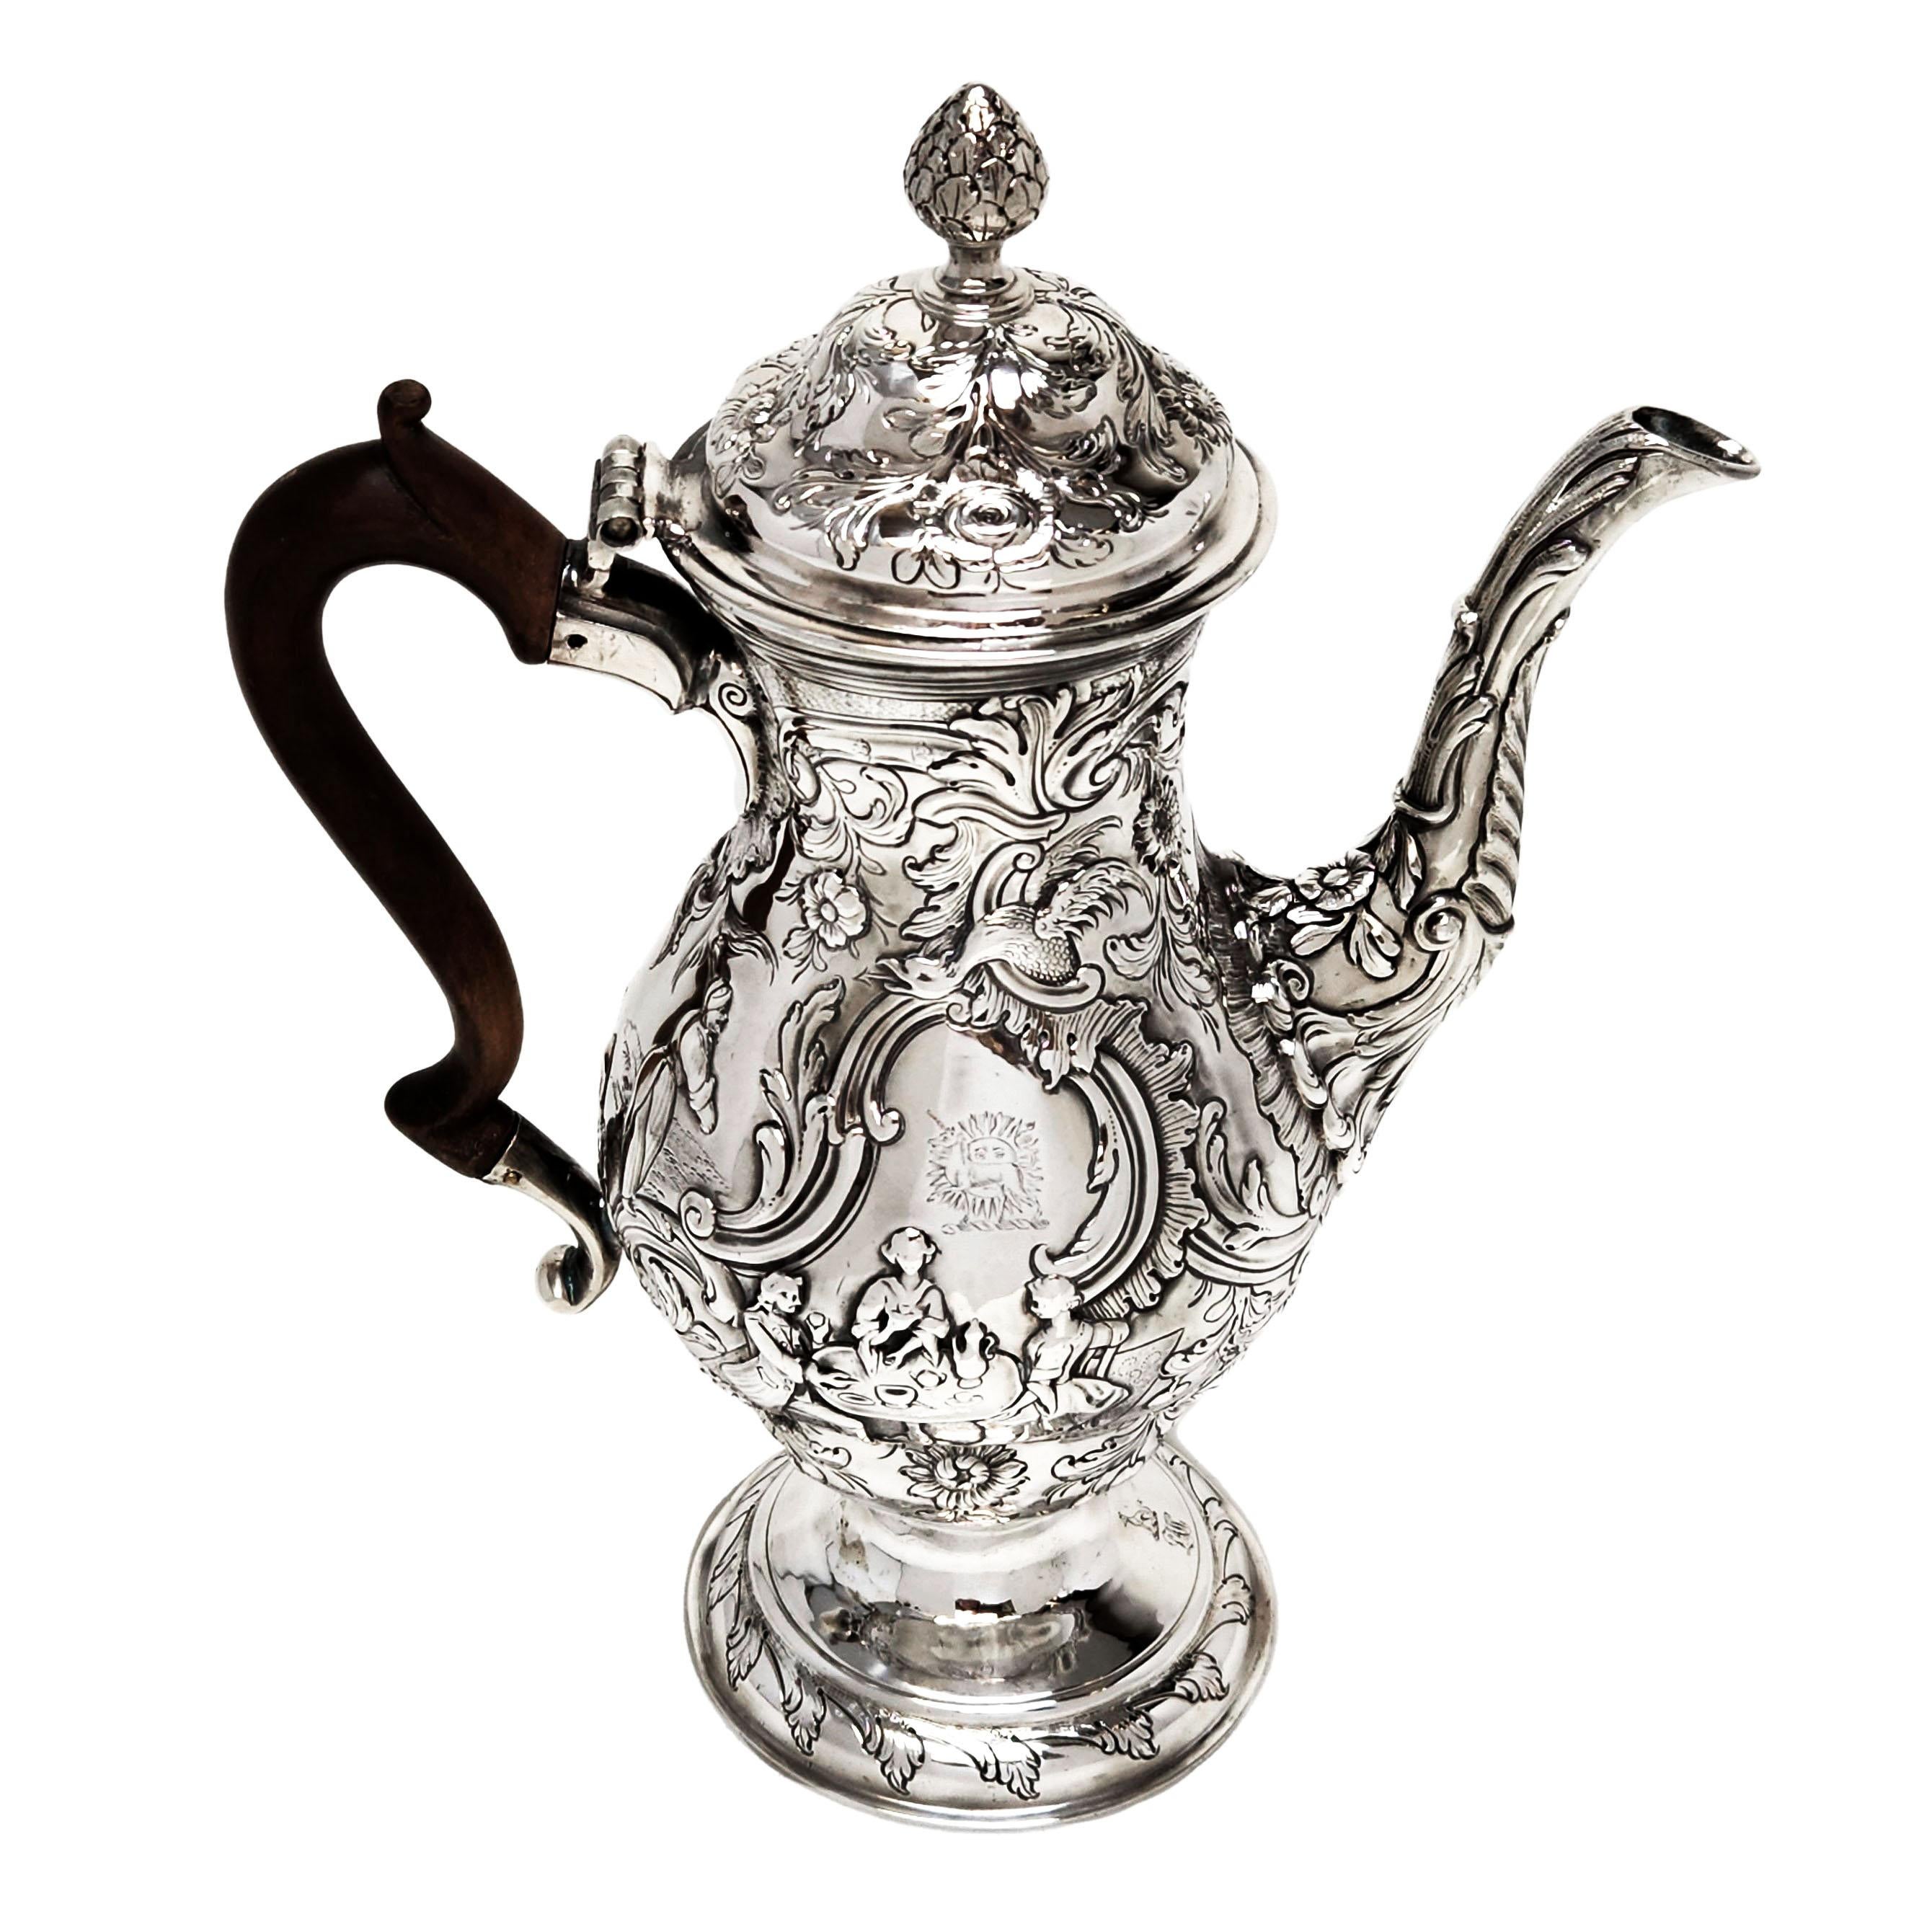 A magnificent antique George III Irish silver coffee pot. This sterling silver coffee pot has a classic baluster shape and is embellished with ornate chased patterning surrounding two shaped cartouches. The chased images show figures seated at a